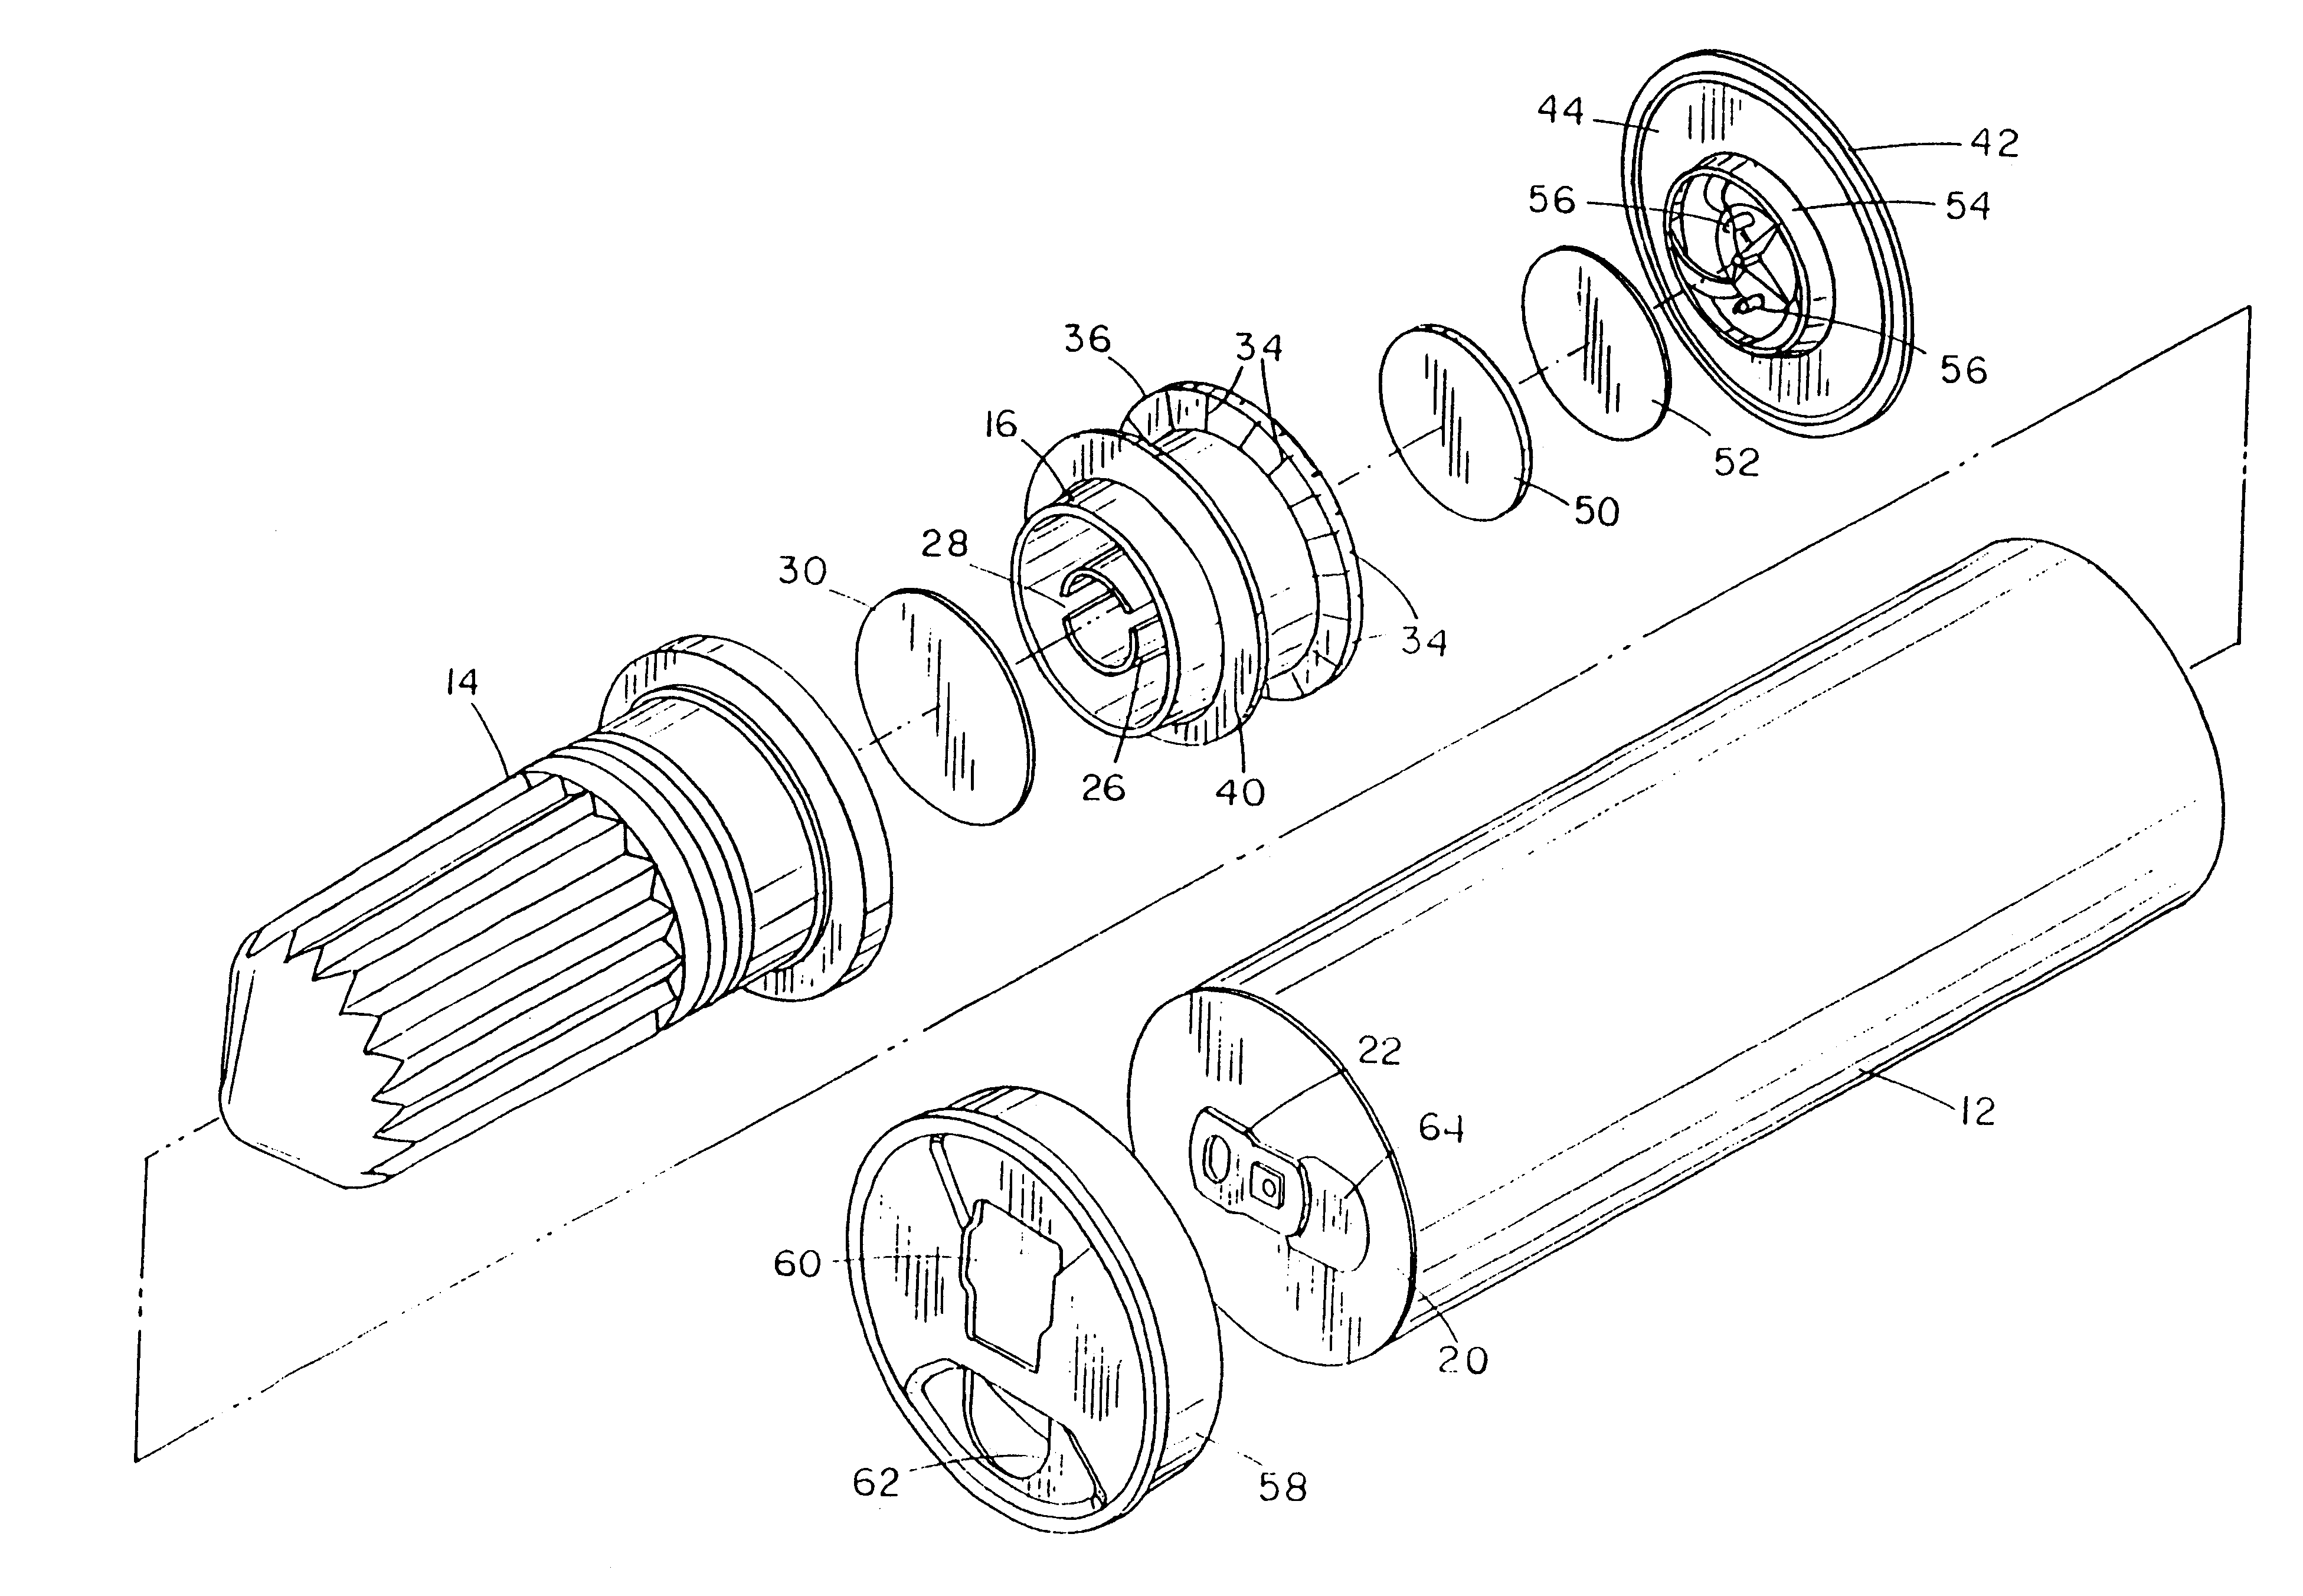 Container with integral module for heating or cooling the contents and method for its manufacture